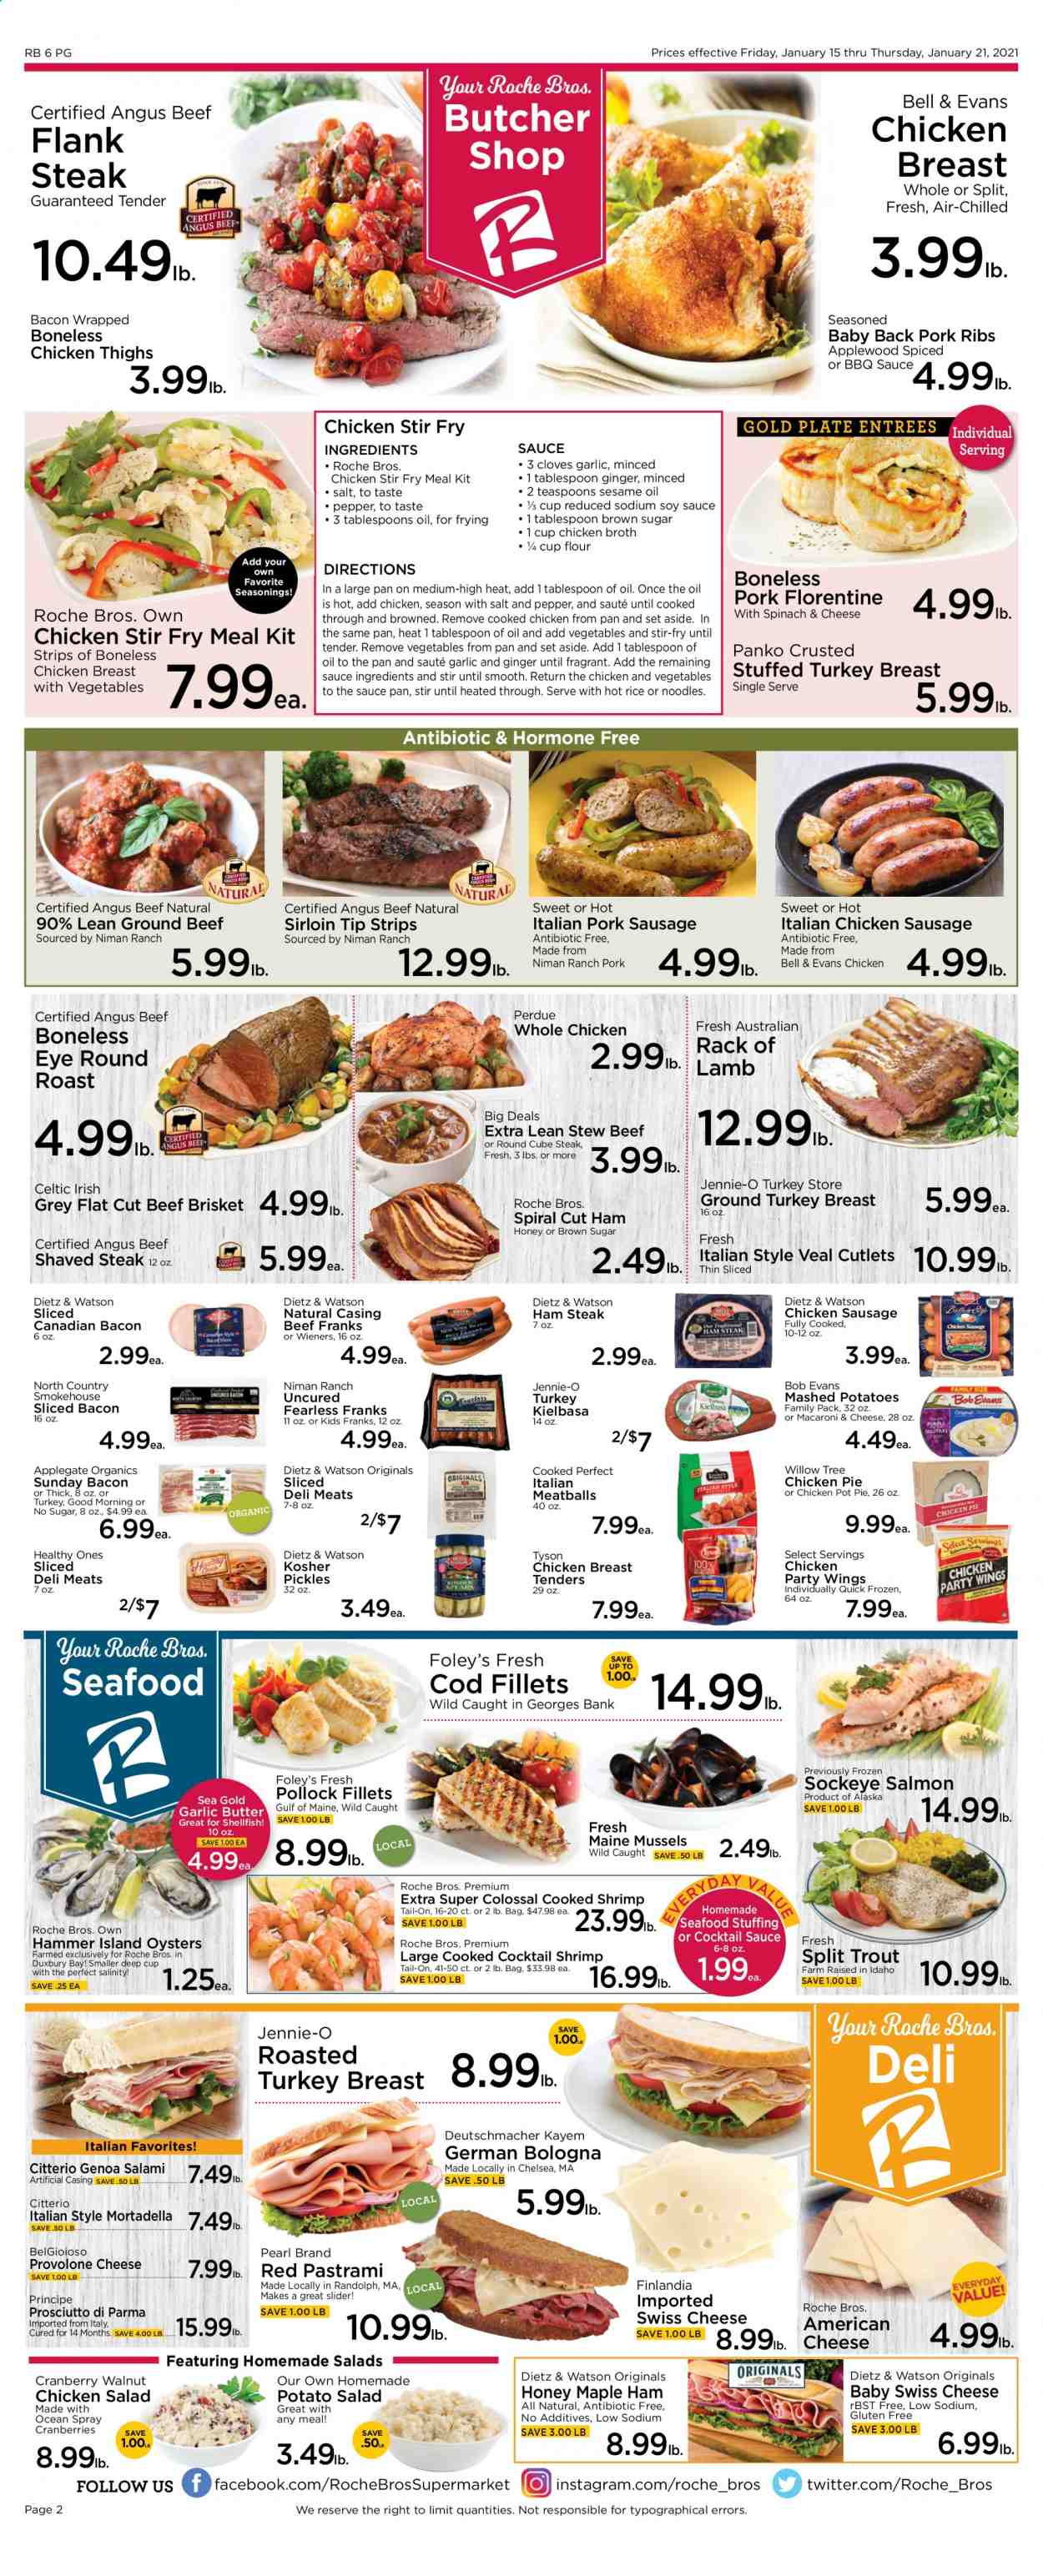 thumbnail - Roche Bros. Flyer - 01/15/2021 - 01/21/2021 - Sales products - pickles, pot pie, pie, panko breadcrumbs, ginger, cod, mussels, salmon, trout, pollock, oysters, seafood, shrimps, macaroni & cheese, mashed potatoes, meatballs, salad, Perdue®, german bologna, Bob Evans, bacon, canadian bacon, salami, ham, ham steaks, prosciutto, Dietz & Watson, sausage, chicken sausage, potato salad, chicken salad, american cheese, mortadella, swiss cheese, Provolone, butter, spinach, strips, flour, chicken broth, broth, noodles, cloves, BBQ sauce, cocktail sauce, soy sauce, pork sausage, sesame oil, walnuts, ground turkey, turkey breast, whole chicken, chicken breasts, chicken thighs, beef meat, ground beef, veal cutlet, veal meat, pastrami, steak, round roast, beef brisket, flank steak, pork meat, pork ribs, pork back ribs, lamb meat, rack of lamb. Page 2.